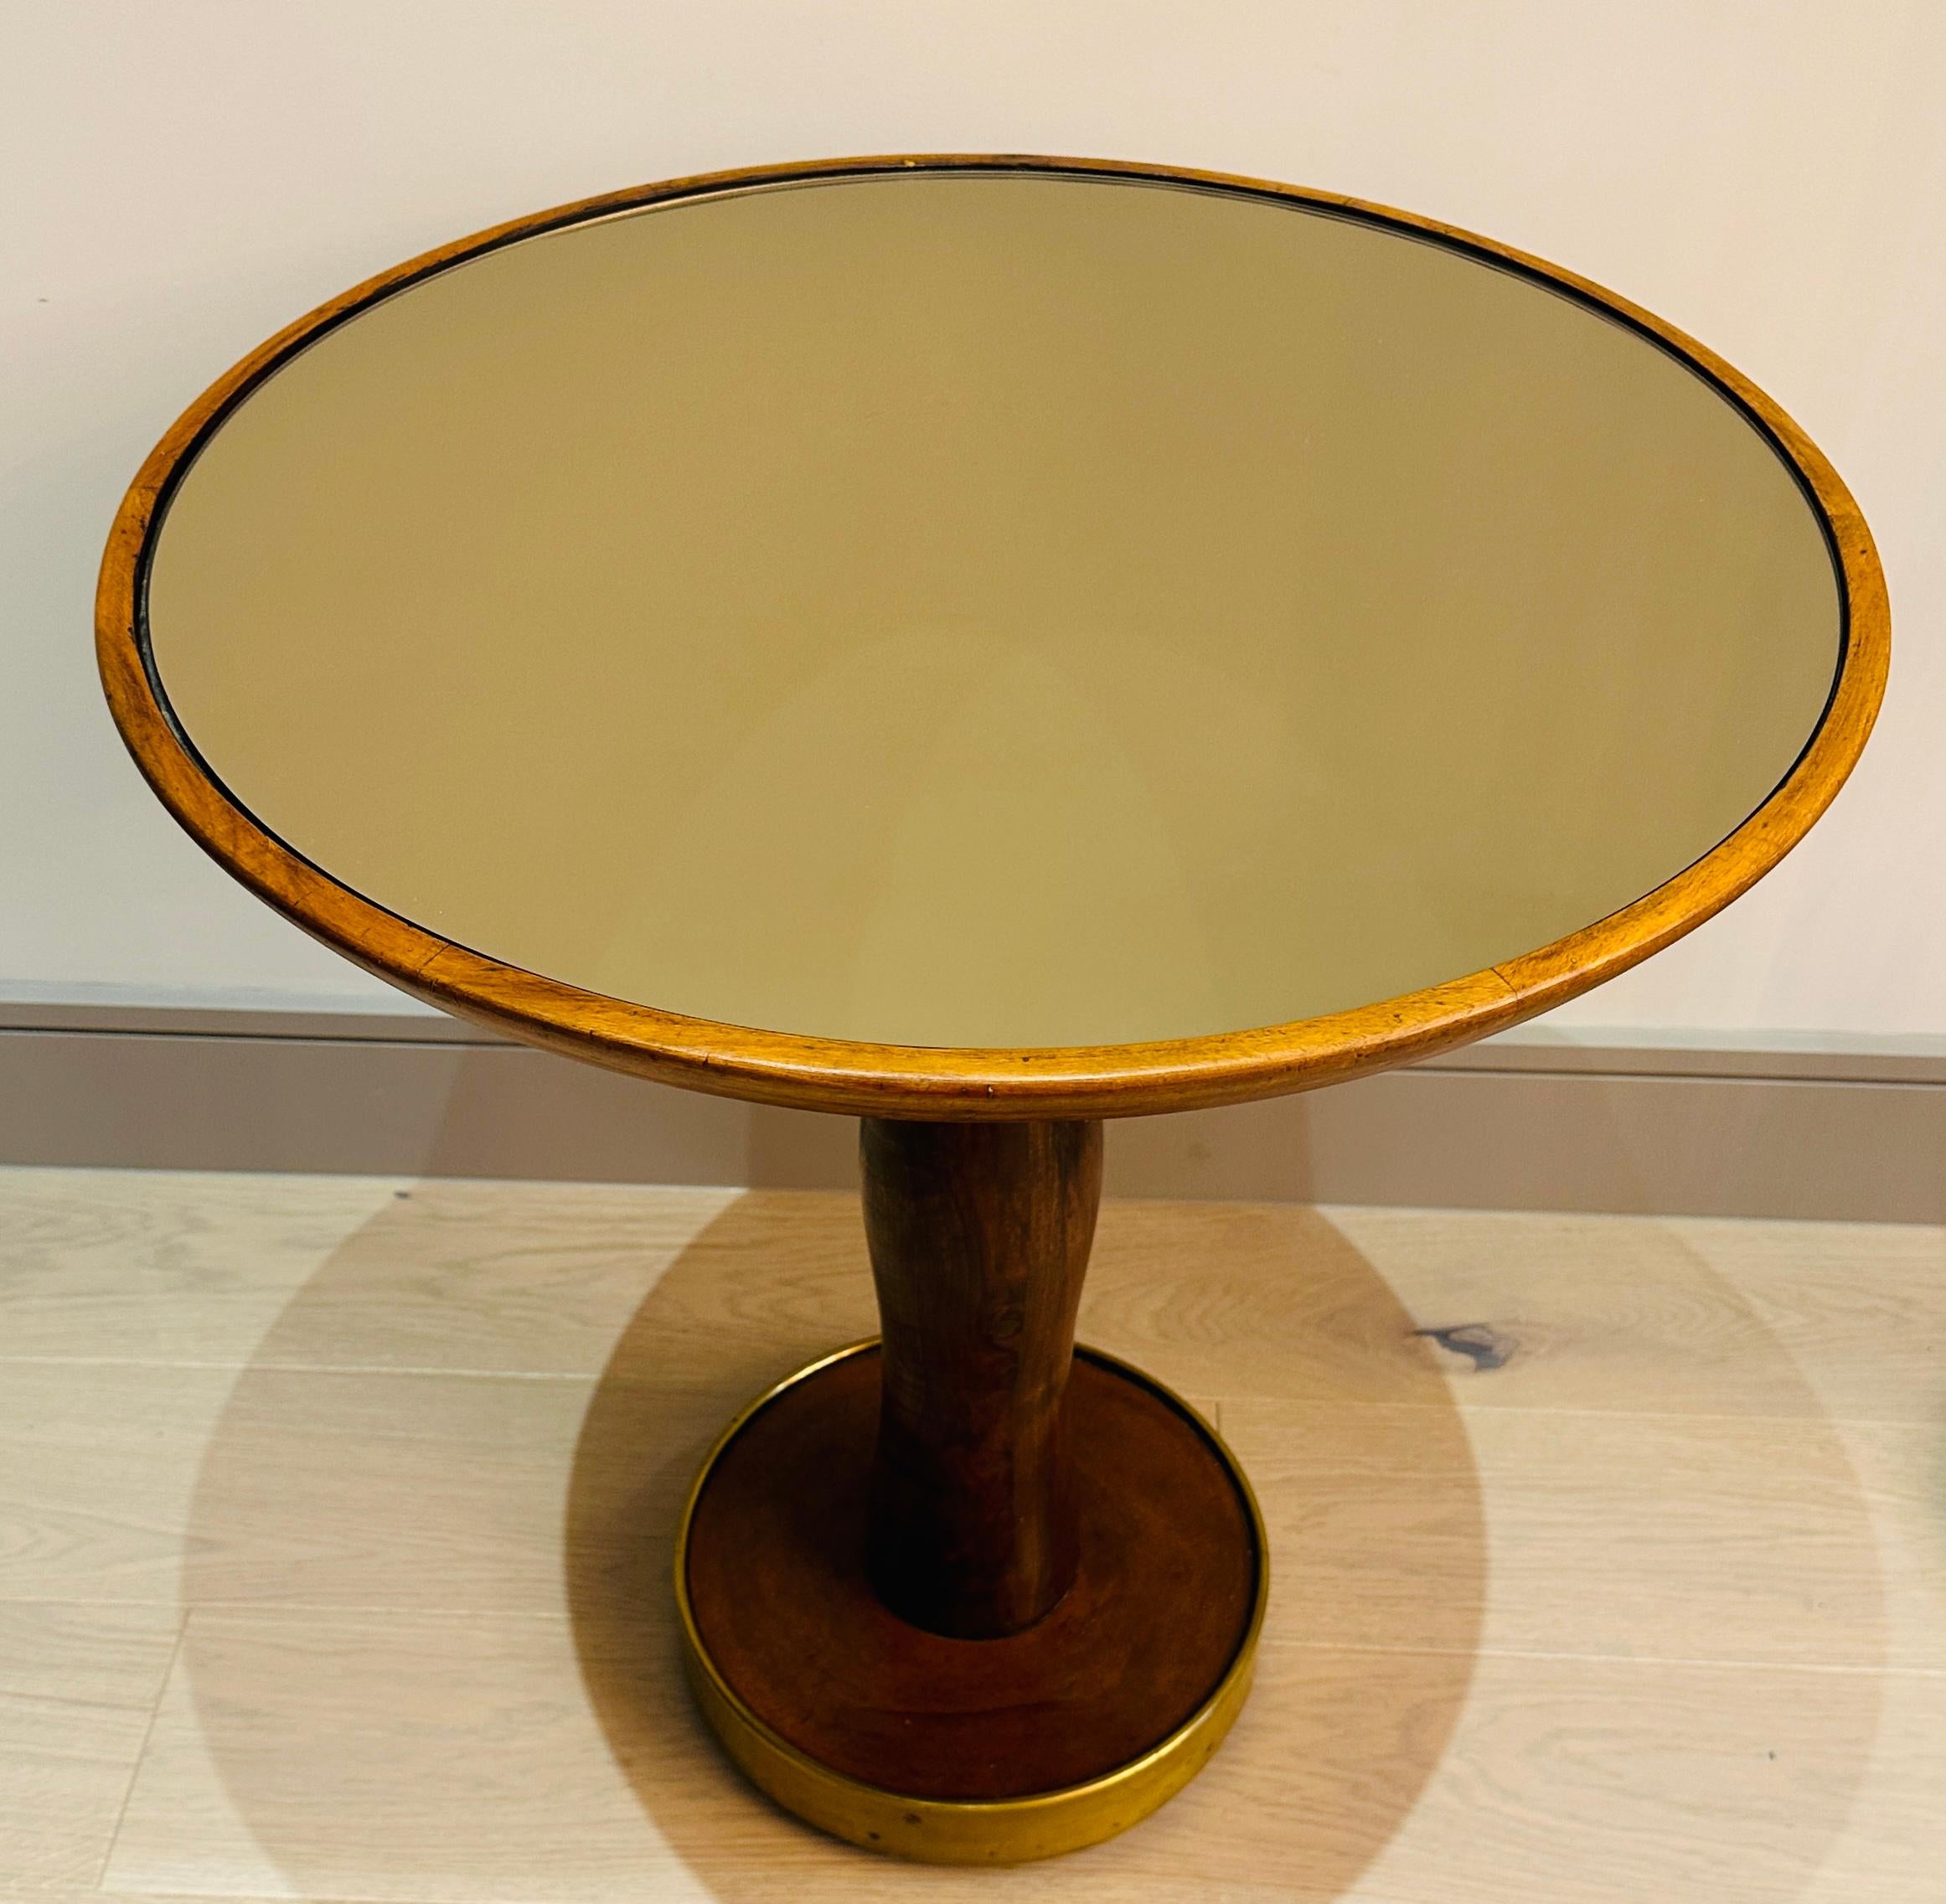 A beautiful organic 1940s Italian circular stained walnut side table with a bronzed glass inset table top and brass base.  The replacement bronzed mirror is inset into the table top wooden edged frame which is secured onto an organic shaped pedestal